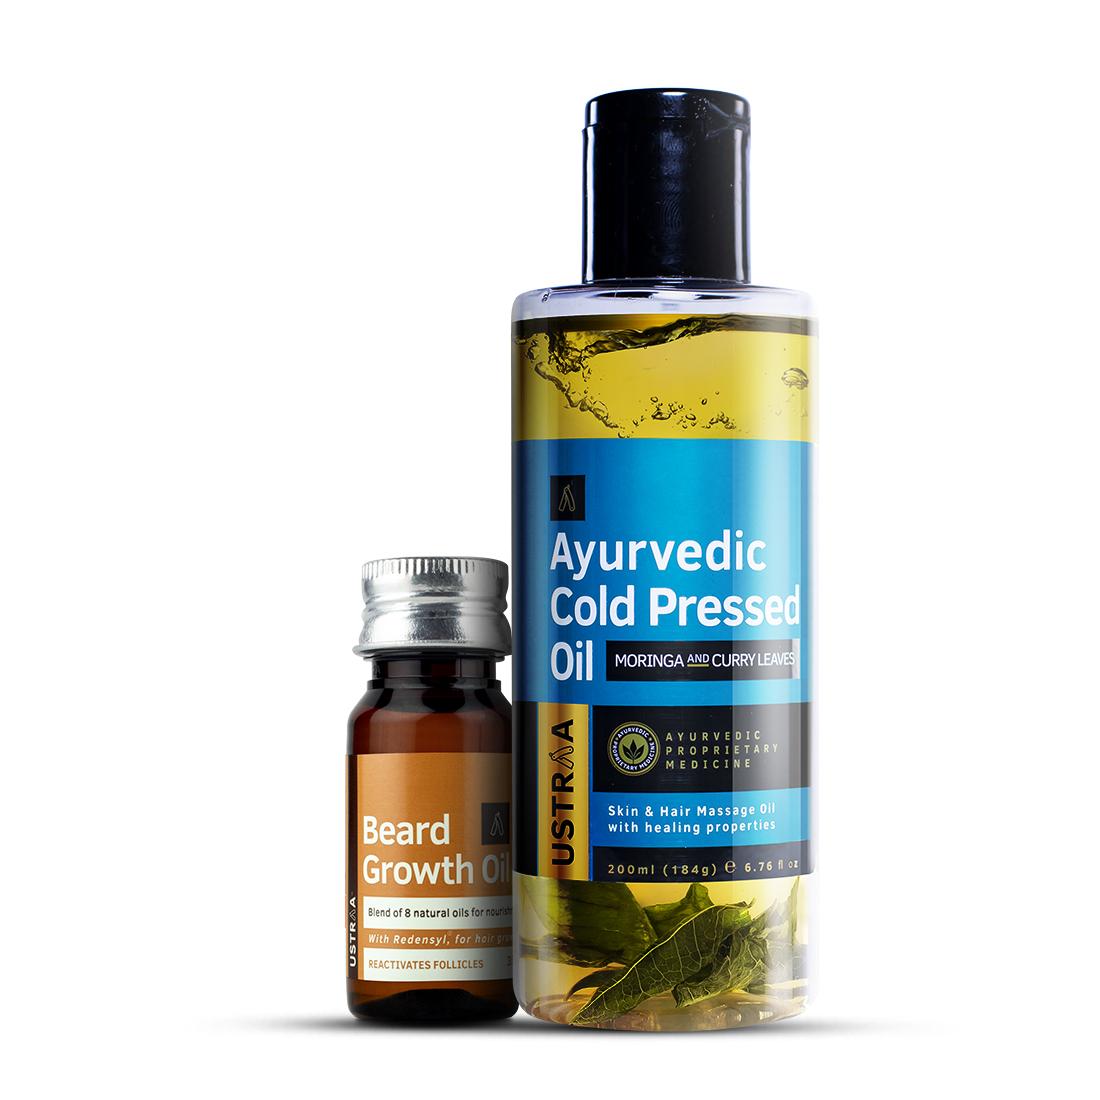 Ayurvedic Cold Pressed Oil & Beard Growth Oil Combo